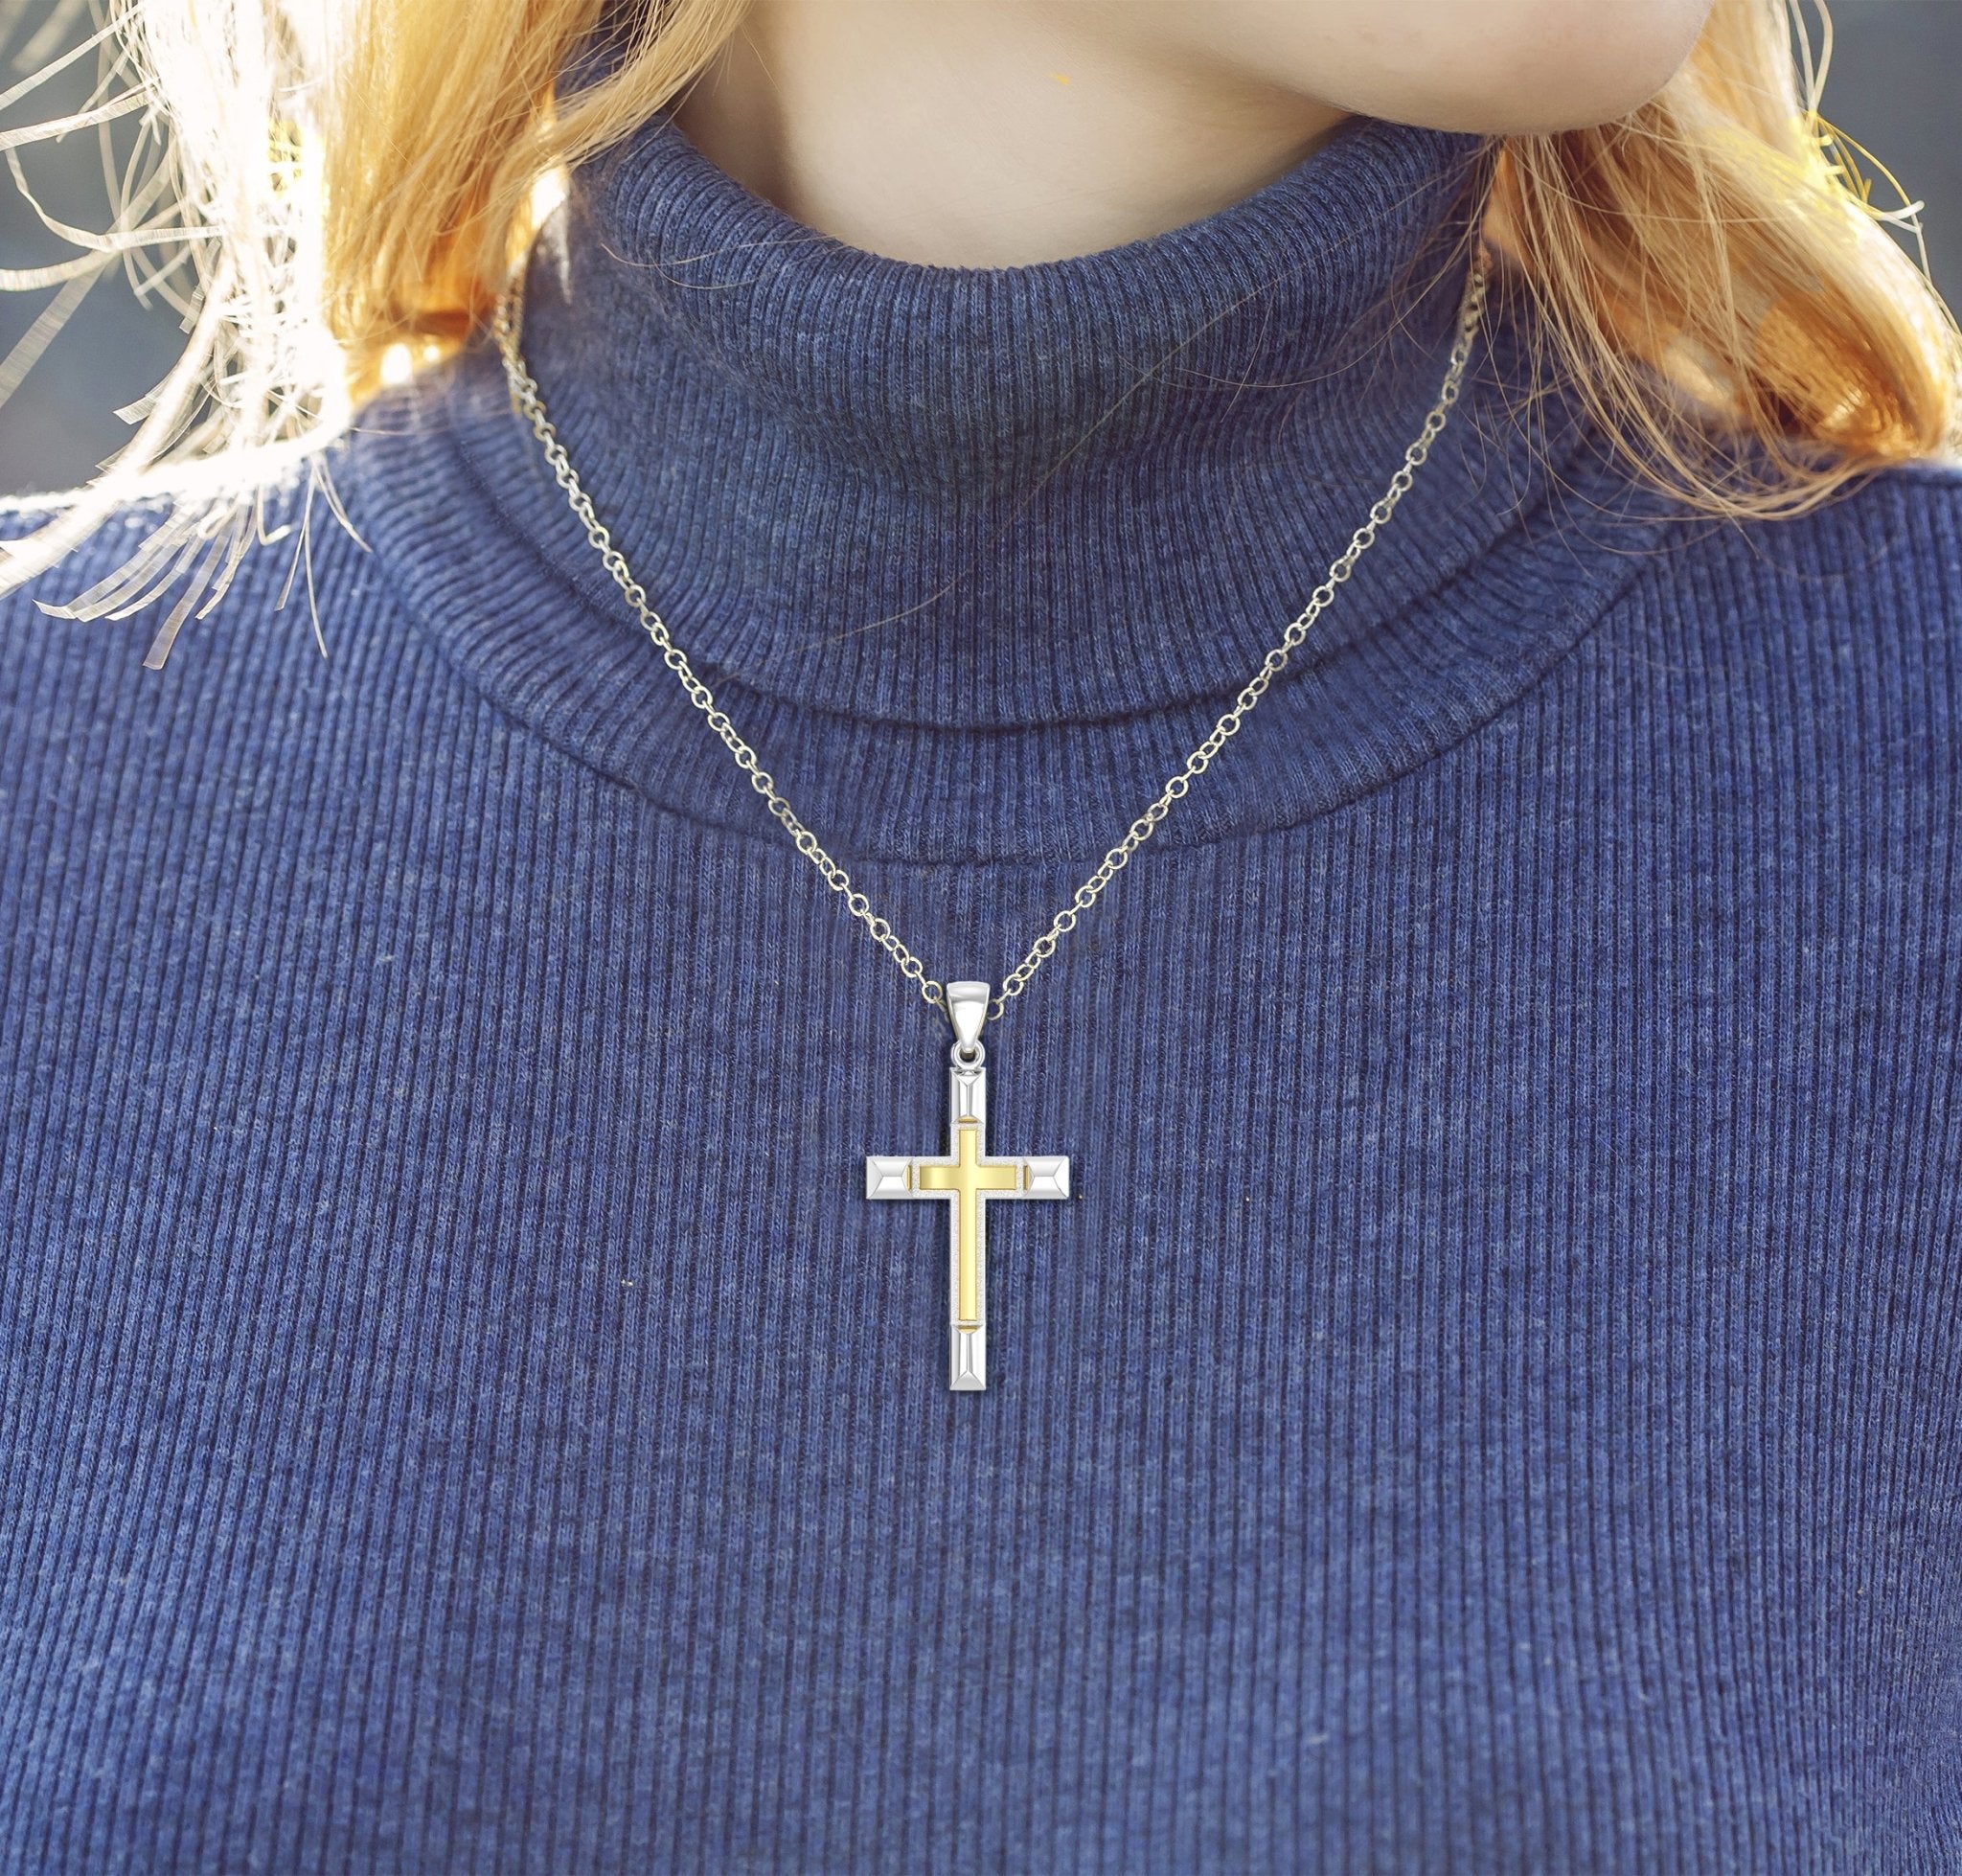 Gold Cross Necklace - Sterling Silver Pendant Necklace